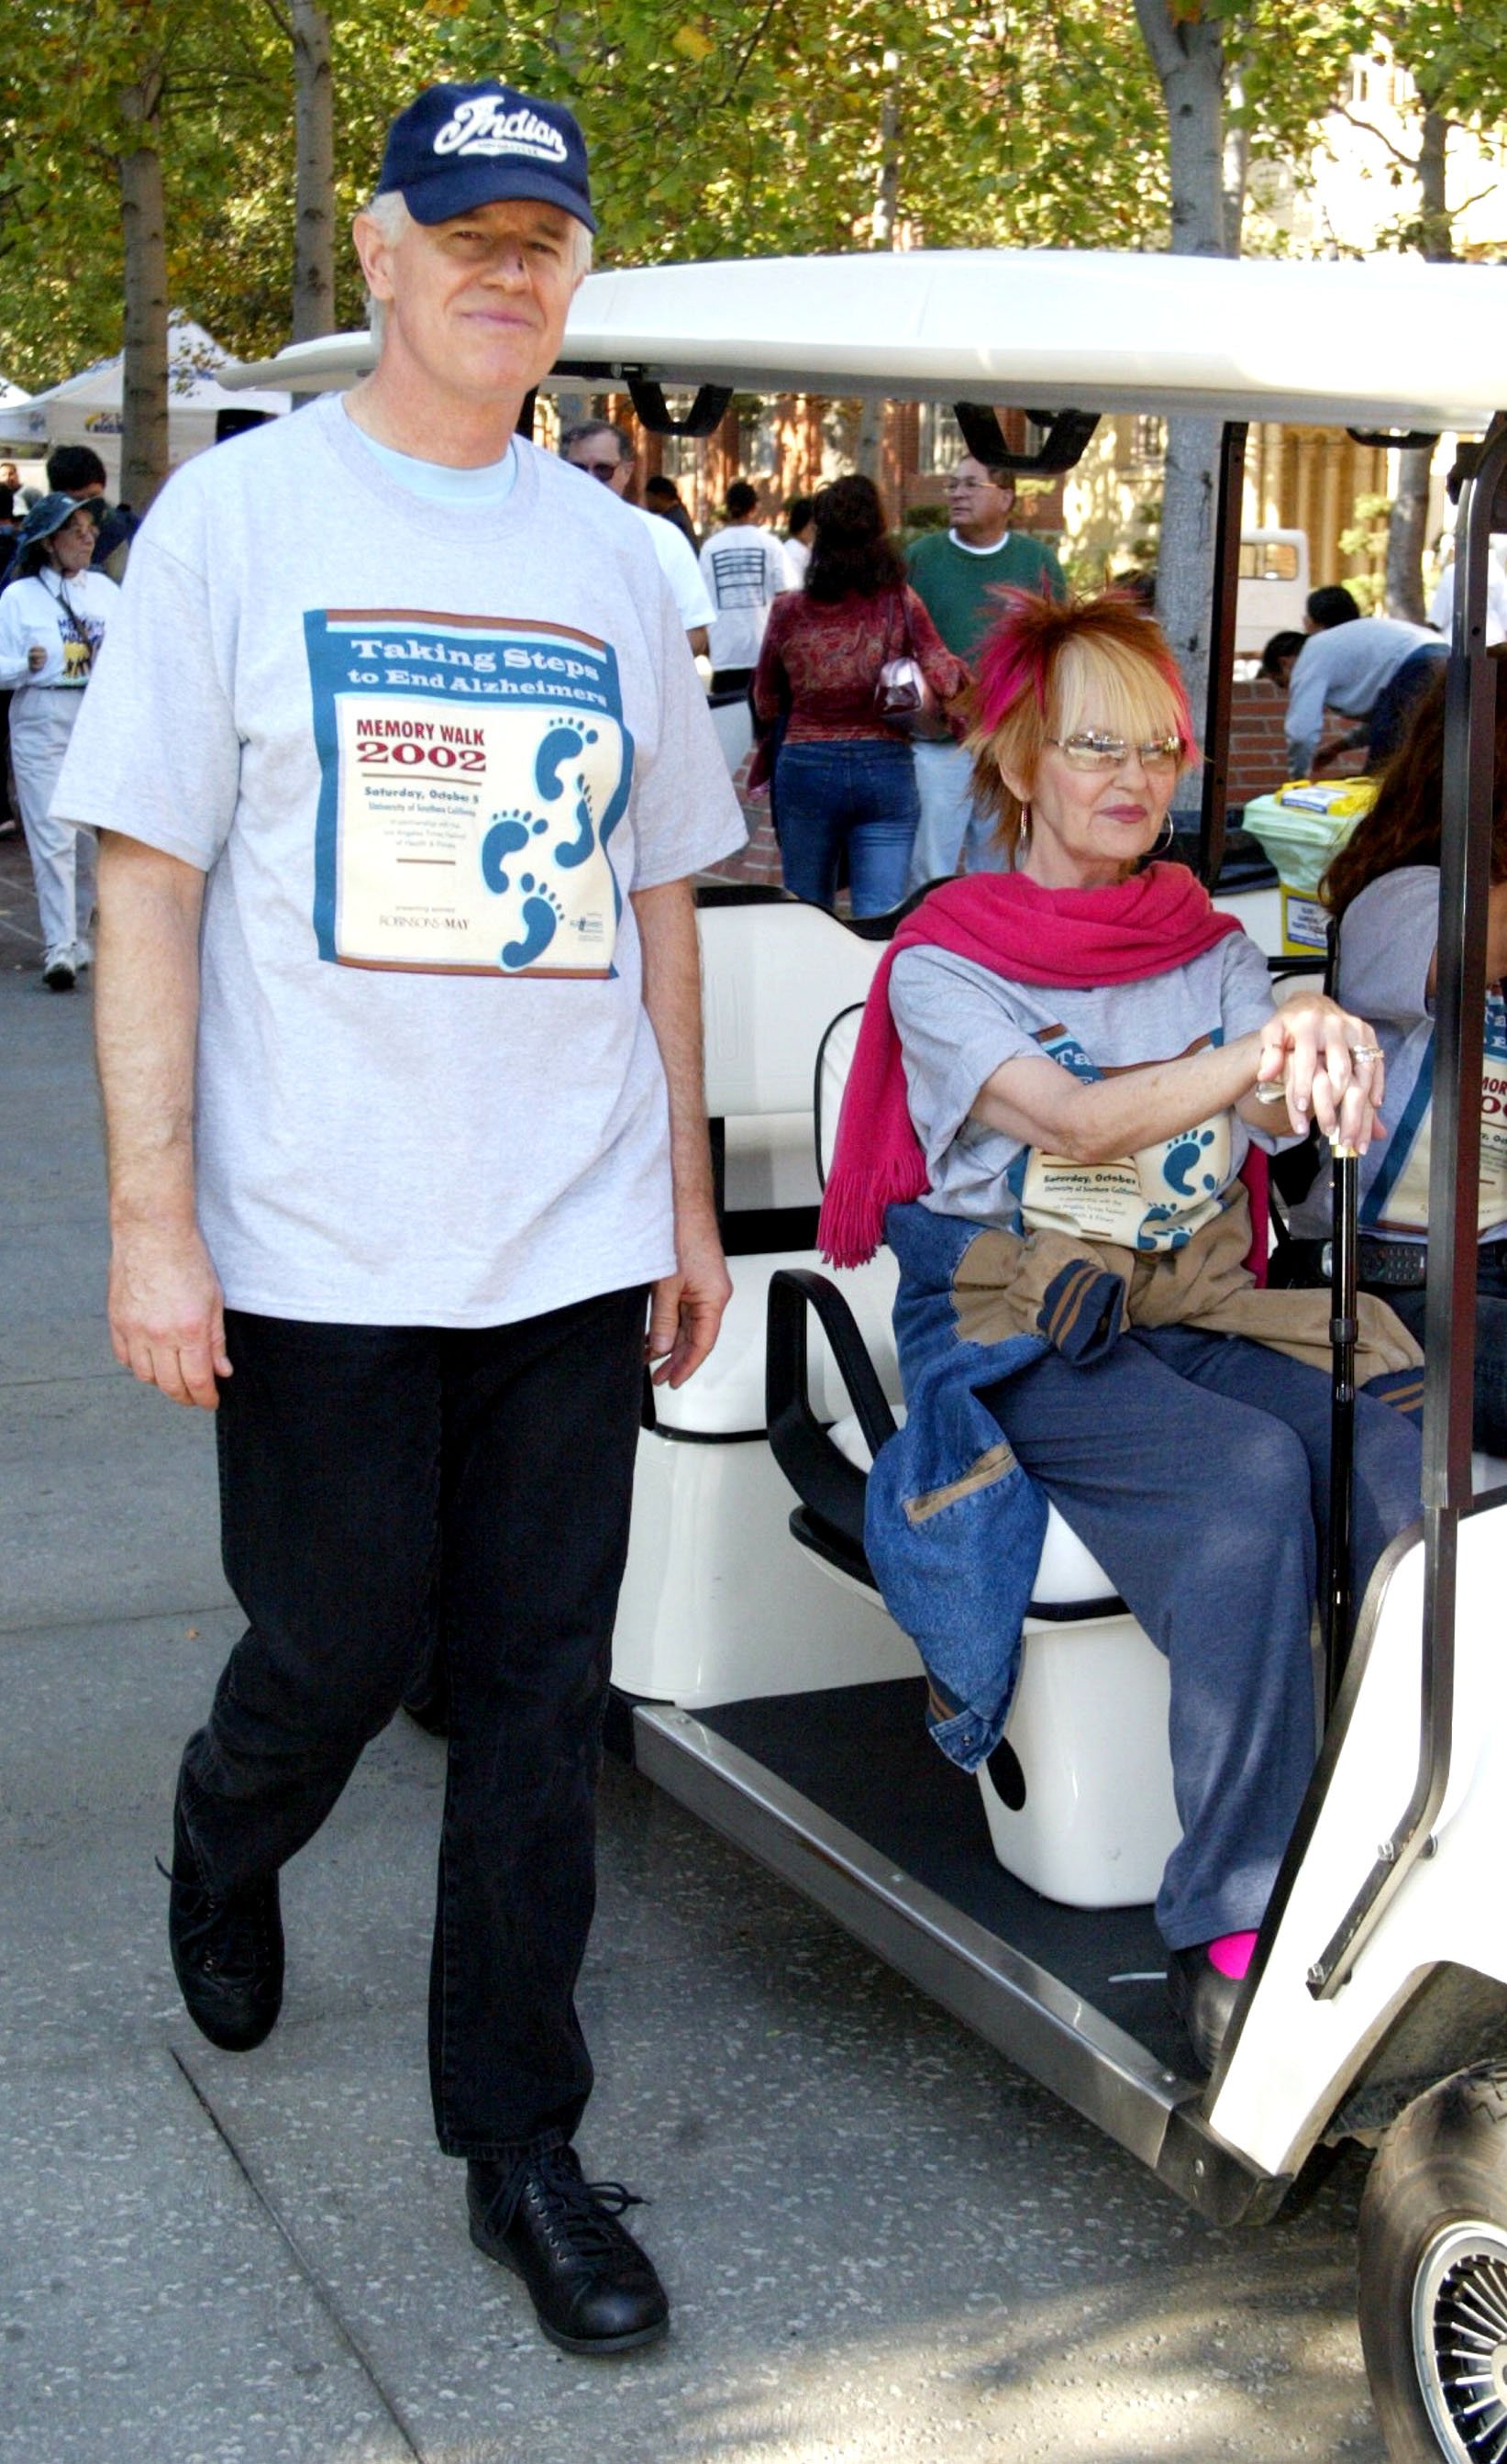 Mike Farrell and Shelley Fabares at the 10th annual Memory Walk to benefit the Alzheimer's Association on October 5, 2002 | Source: Getty Images